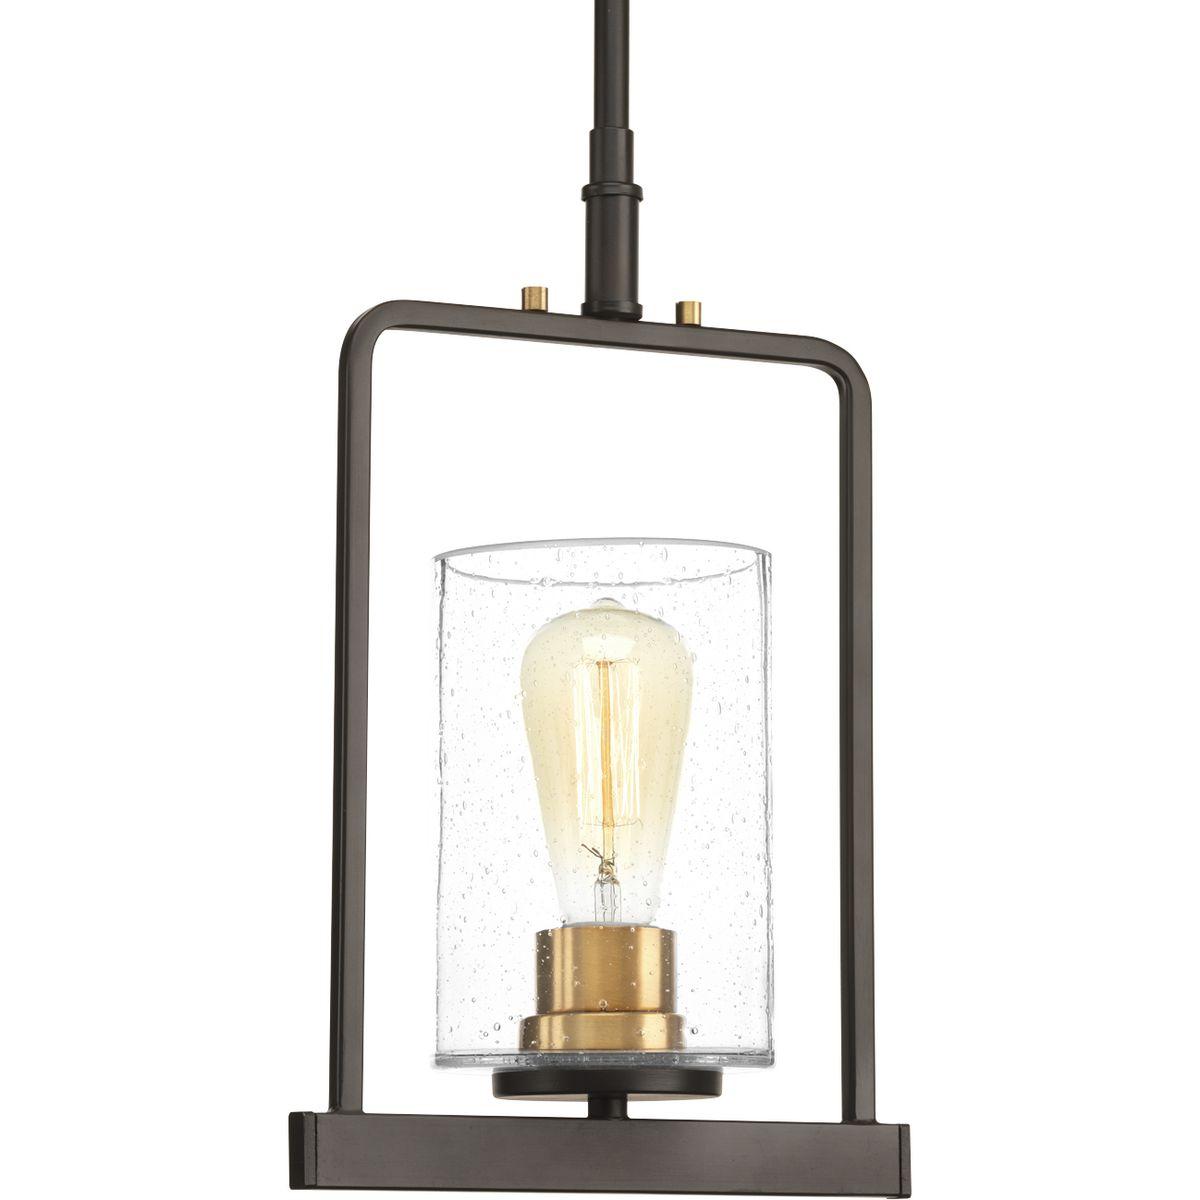 Hubbell P500042-020 Whether for a mountain cabin or an urban retreat, the rustic charm of the Looking Glass collection is an artful display for romantic vintage lighting. Inspired by a timber frame farmhouse, its frame features iron elements that support clear, seeded glass 